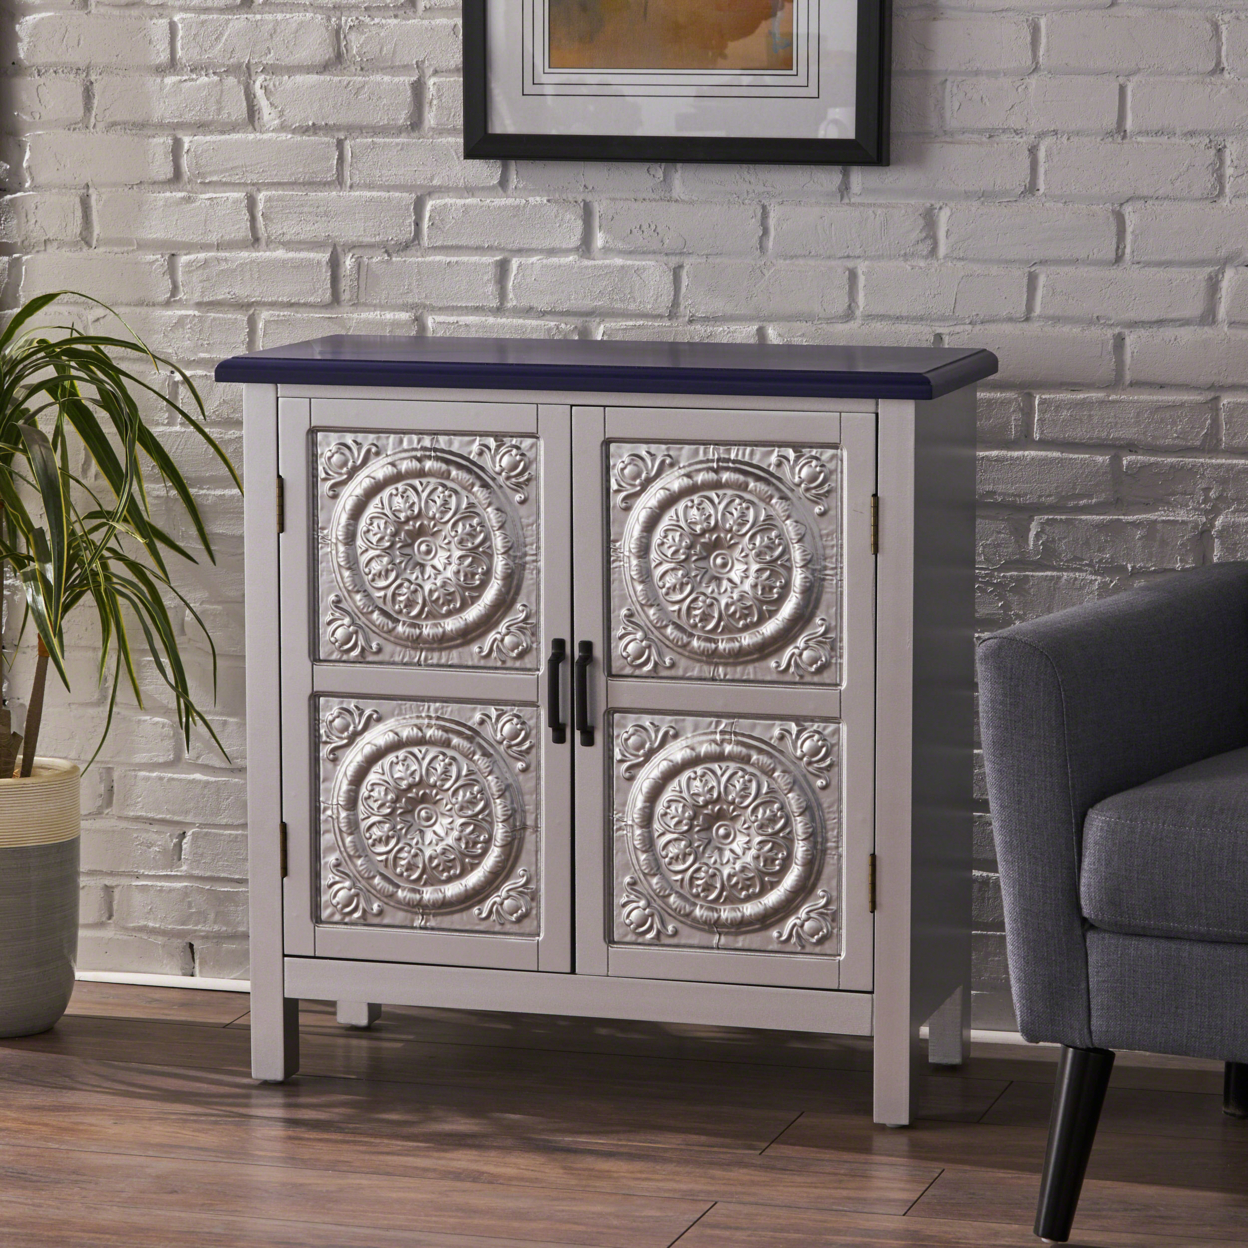 Aliana Finished Firwood Cabinet With Faux Wood Overlay And Accented Top - Silver/Navy Blue